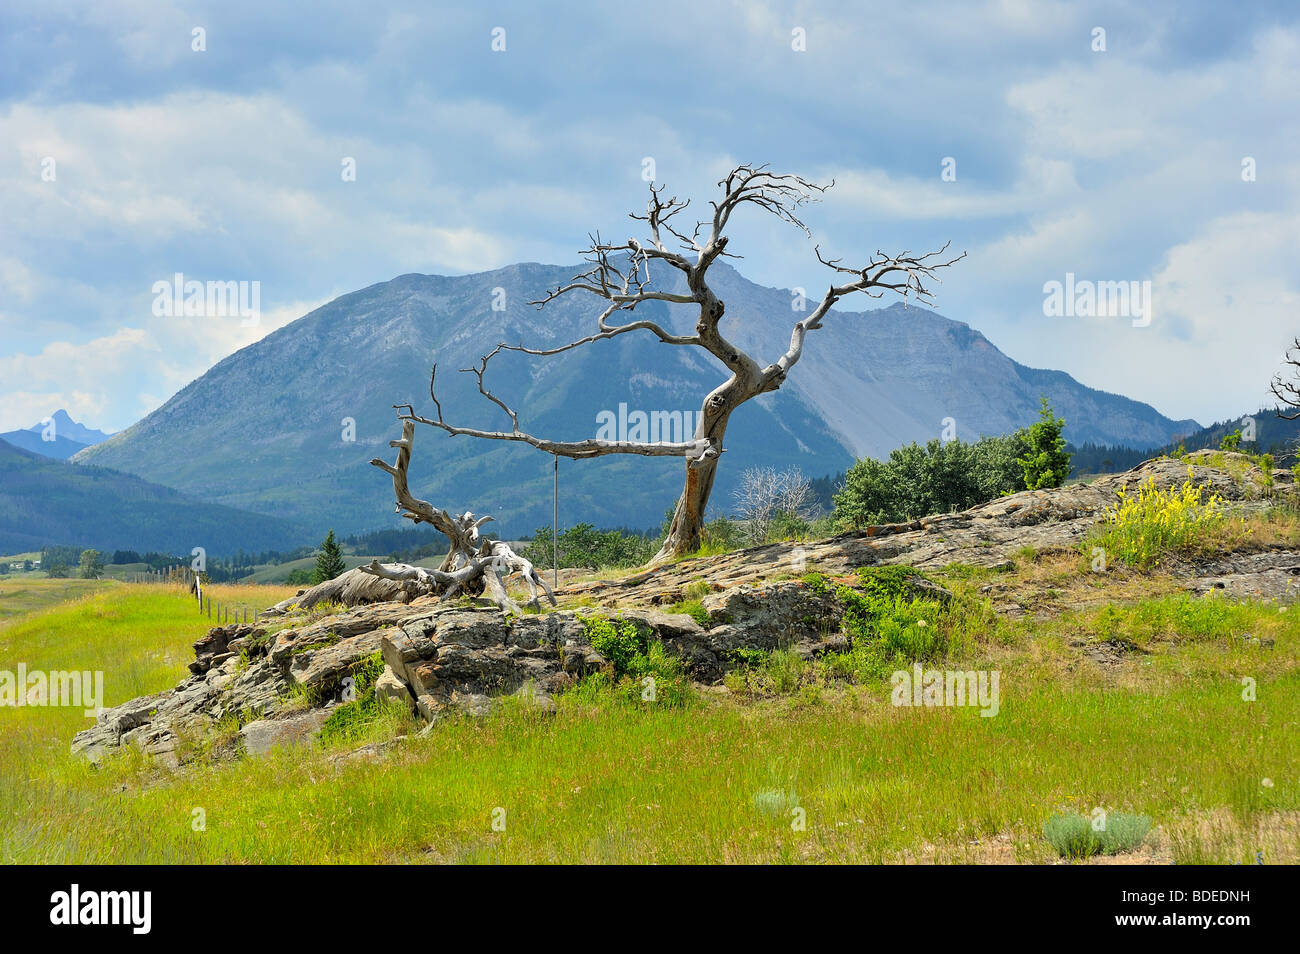 The 700 year old tree Stock Photo